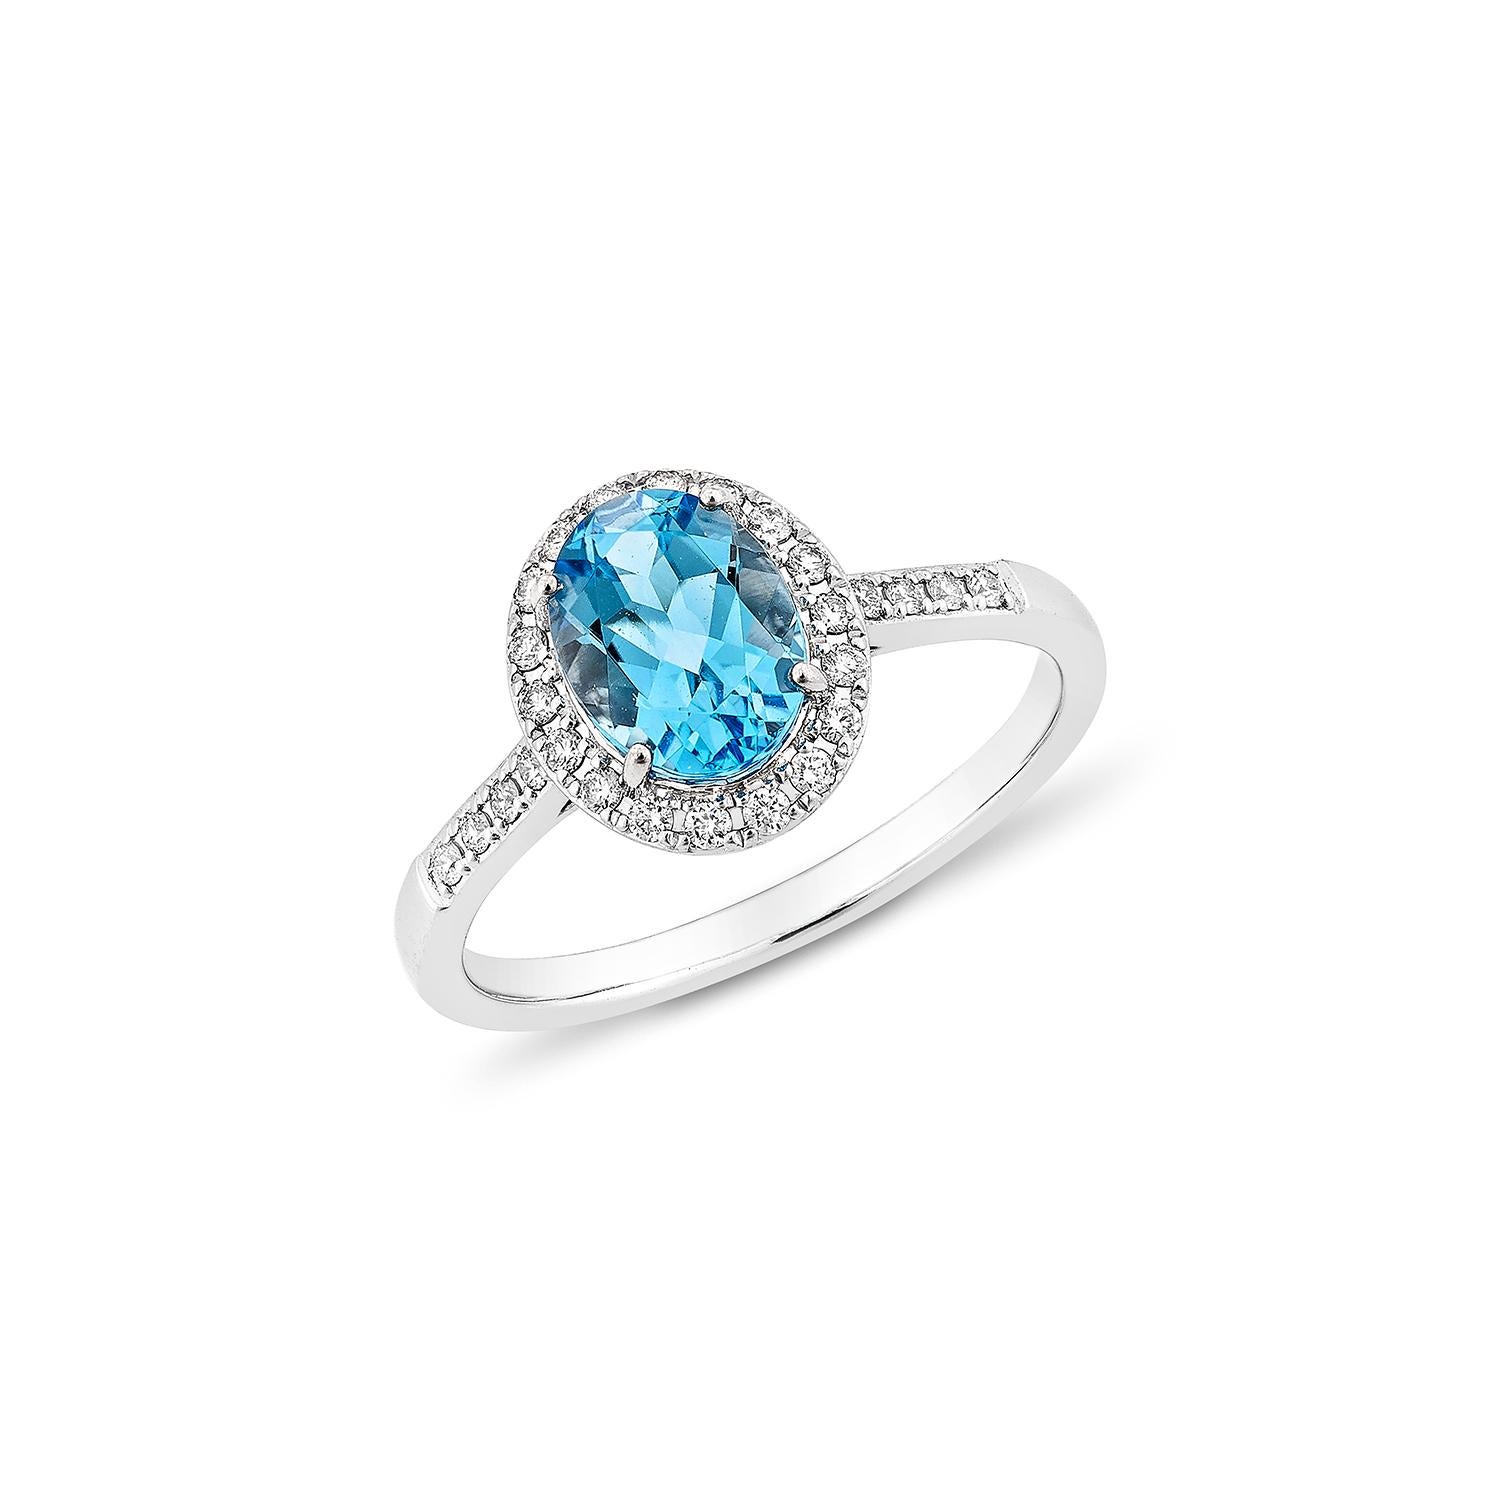 Contemporary 1.49 Carat Swiss Blue Topaz Fancy Ring in 14Karat White Gold with White Diamond. For Sale